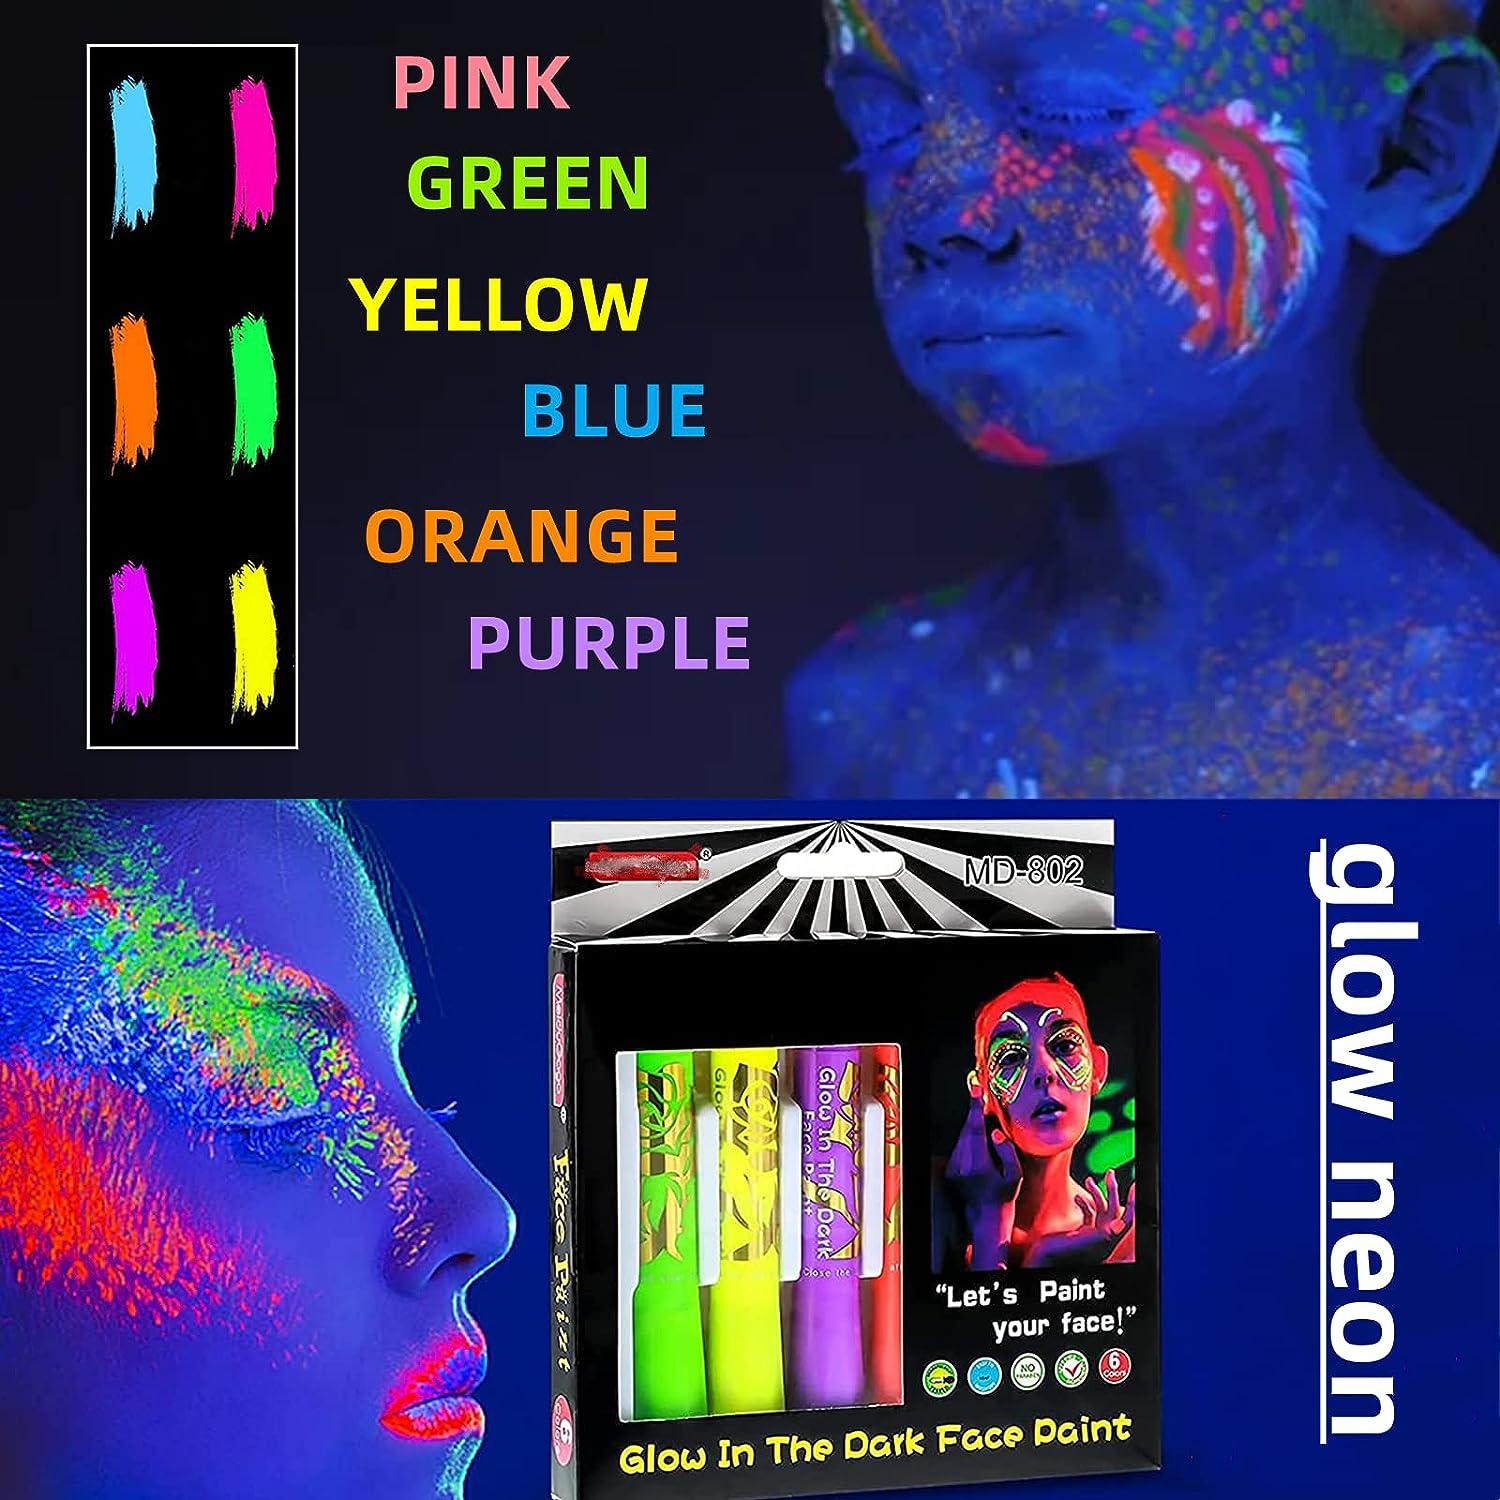  Glow In the Dark Face Paint Washable Luminous Party Crayons  Mardi Gras Halloween Makeup Marker Pen Face Painting Sticks for Kids Adult  : Arts, Crafts & Sewing